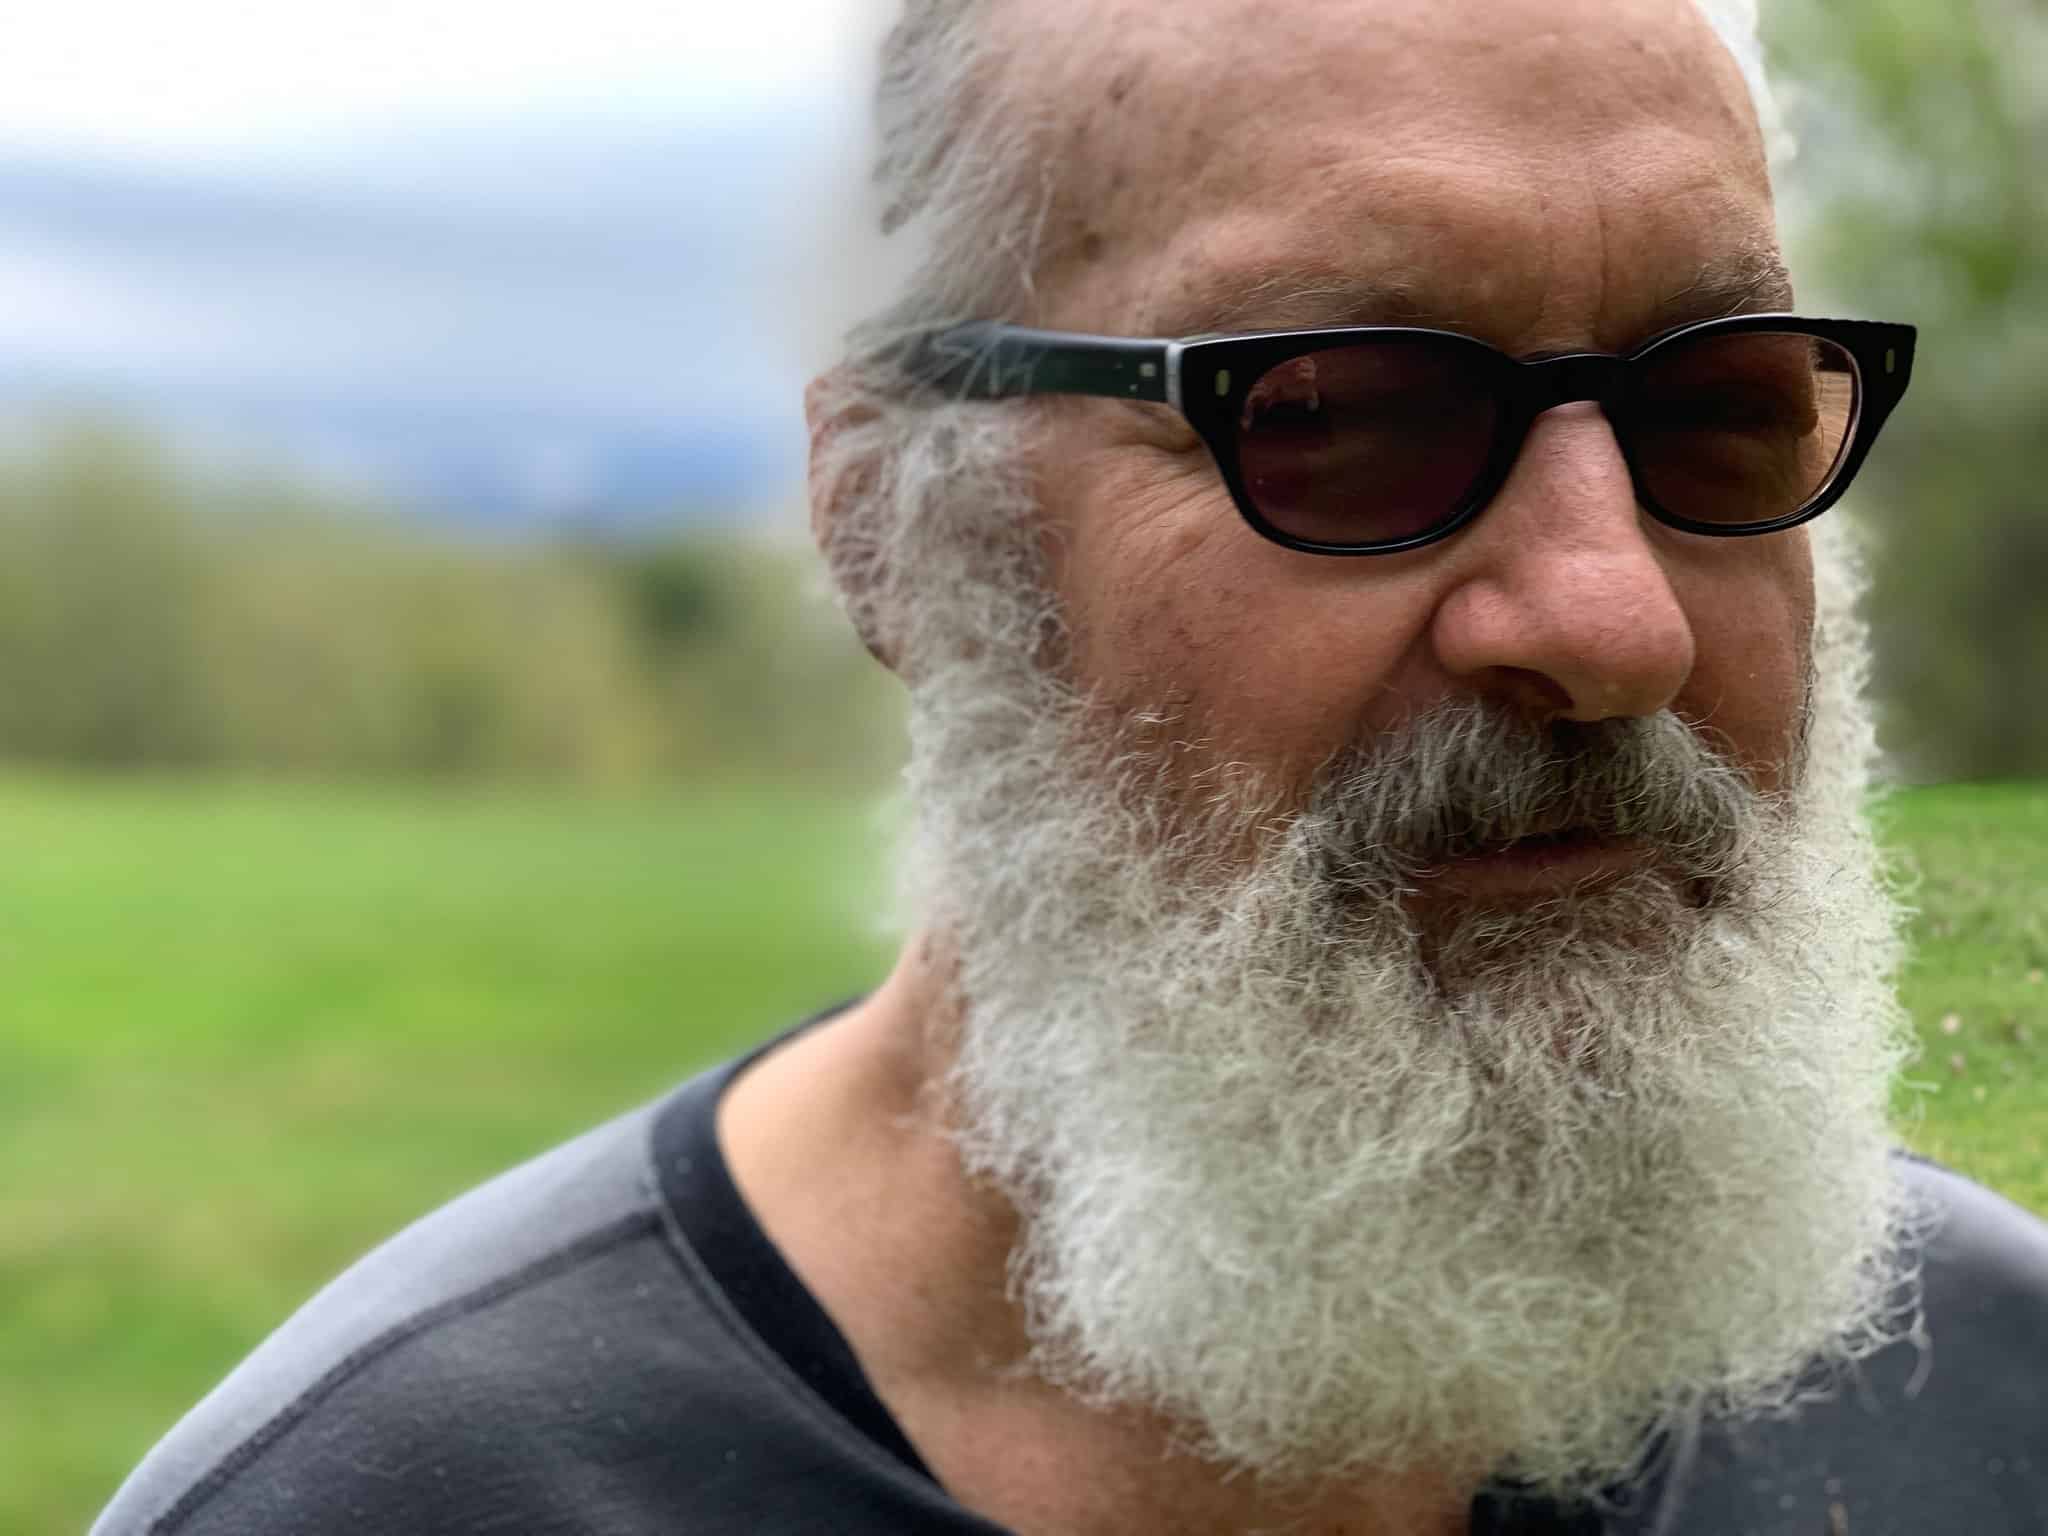 Randy Quaid Net Worth In 2022, Birthday, Age, Wife, Kids And Movies